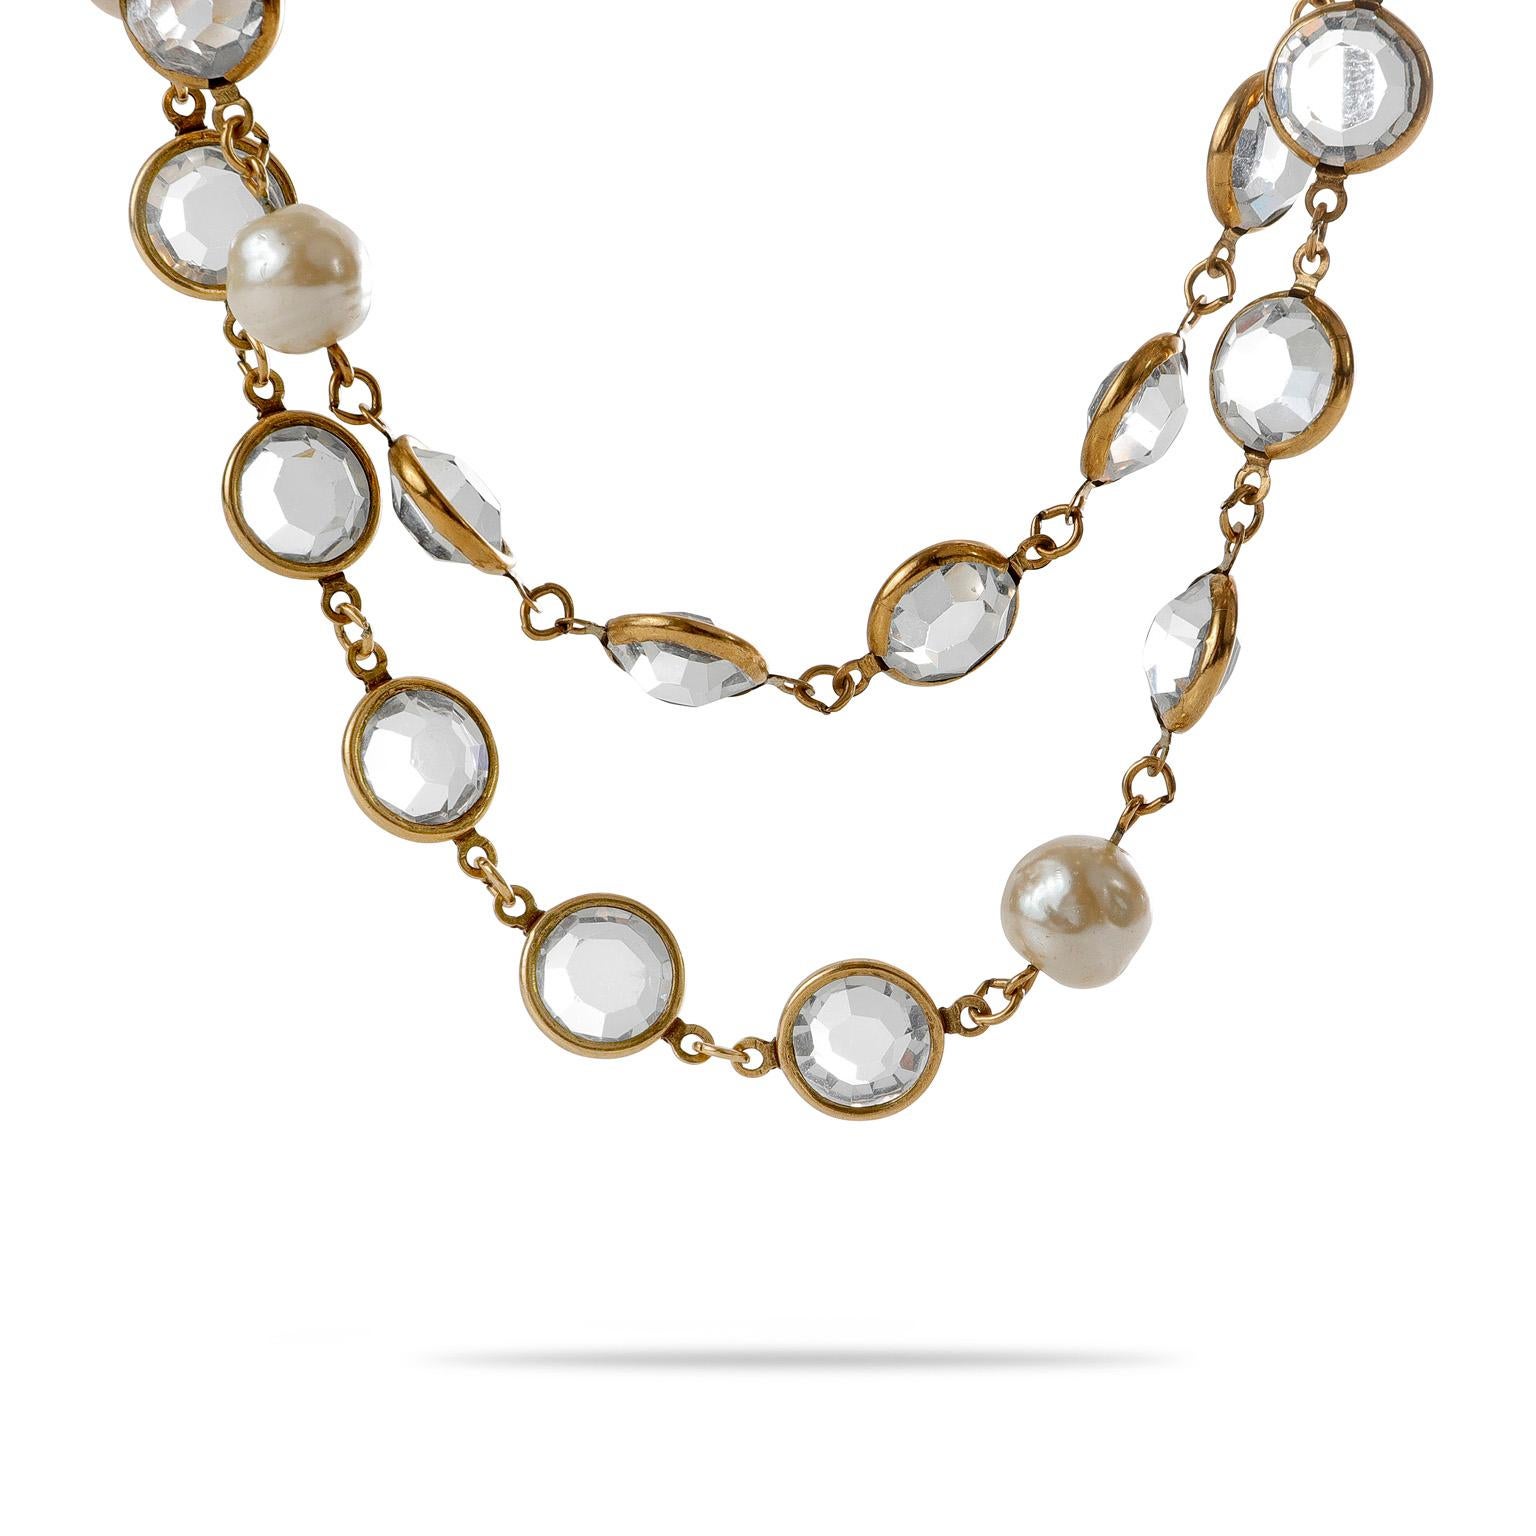 Chanel Vintage Rose Cut Crystal and Pearl Long Necklace In Good Condition For Sale In Palm Beach, FL